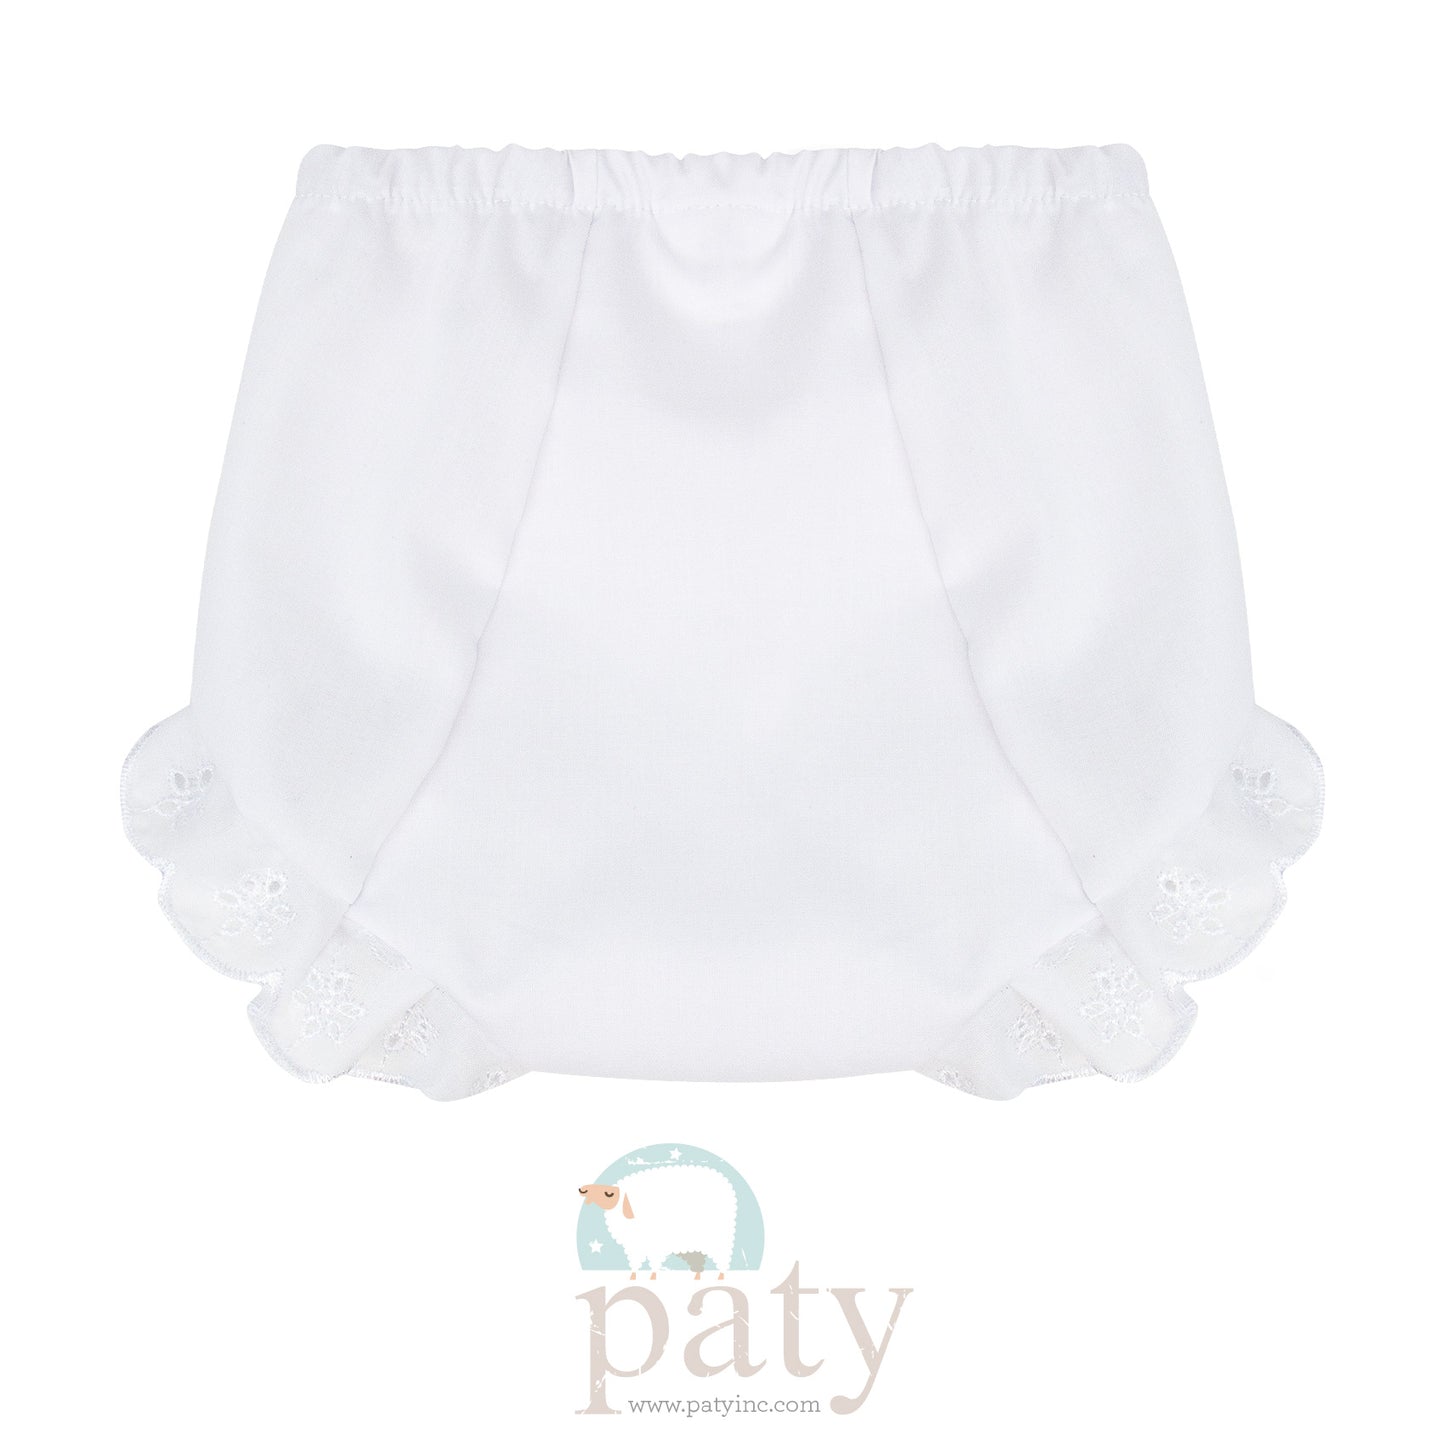 Diaper Cover with Eyelet - White